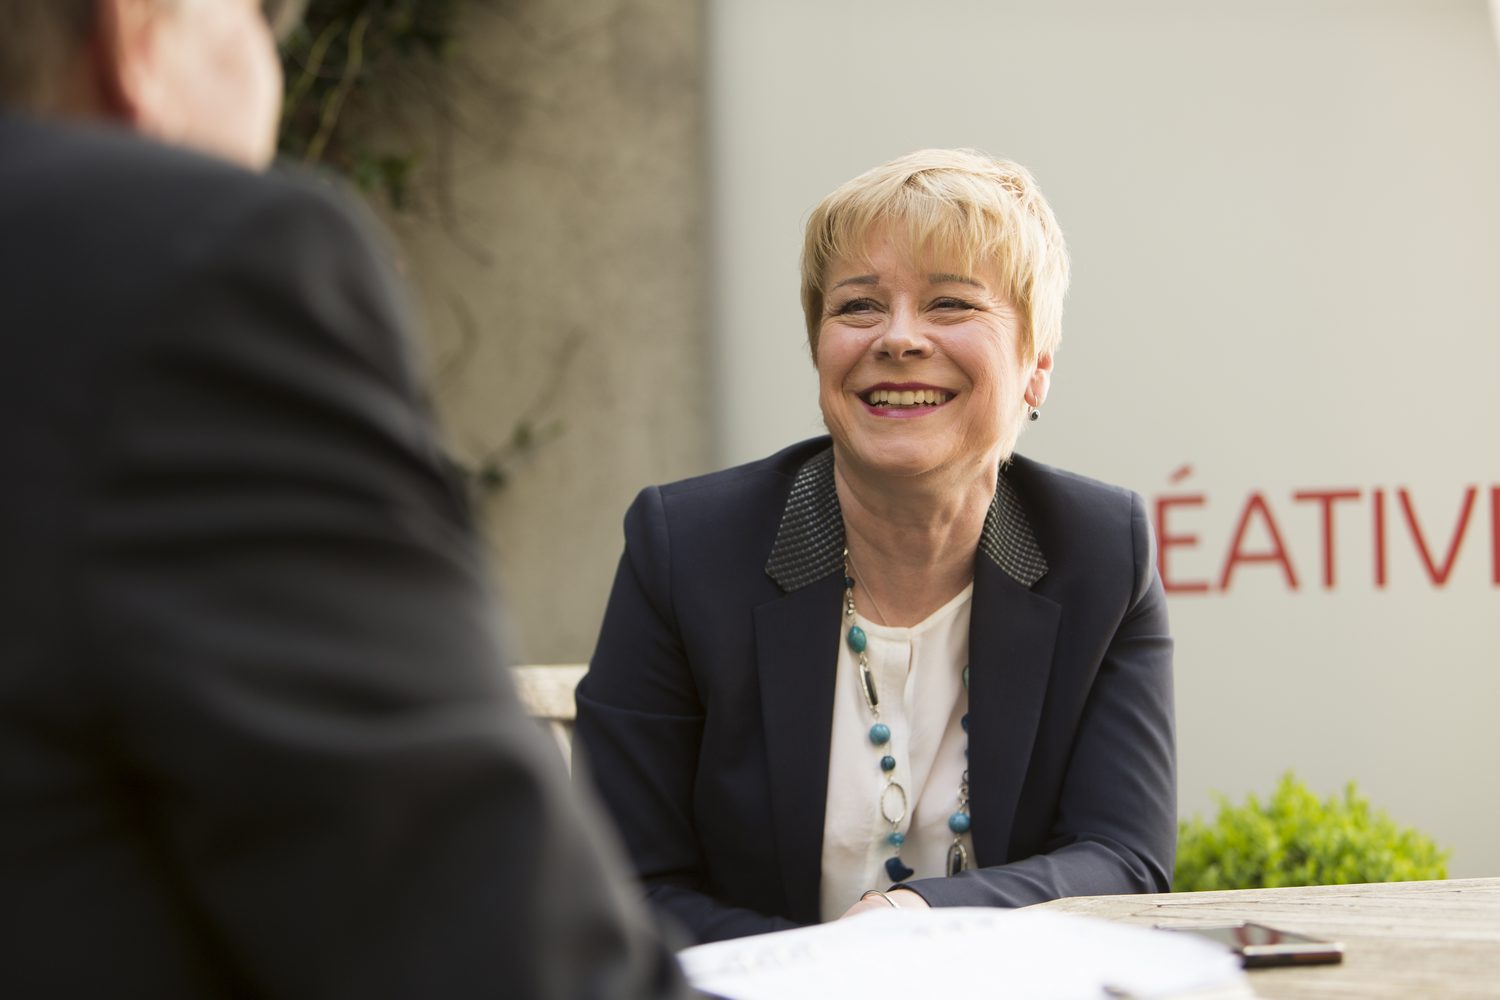 Interview with Linda Jackson, CEO of Peugeot